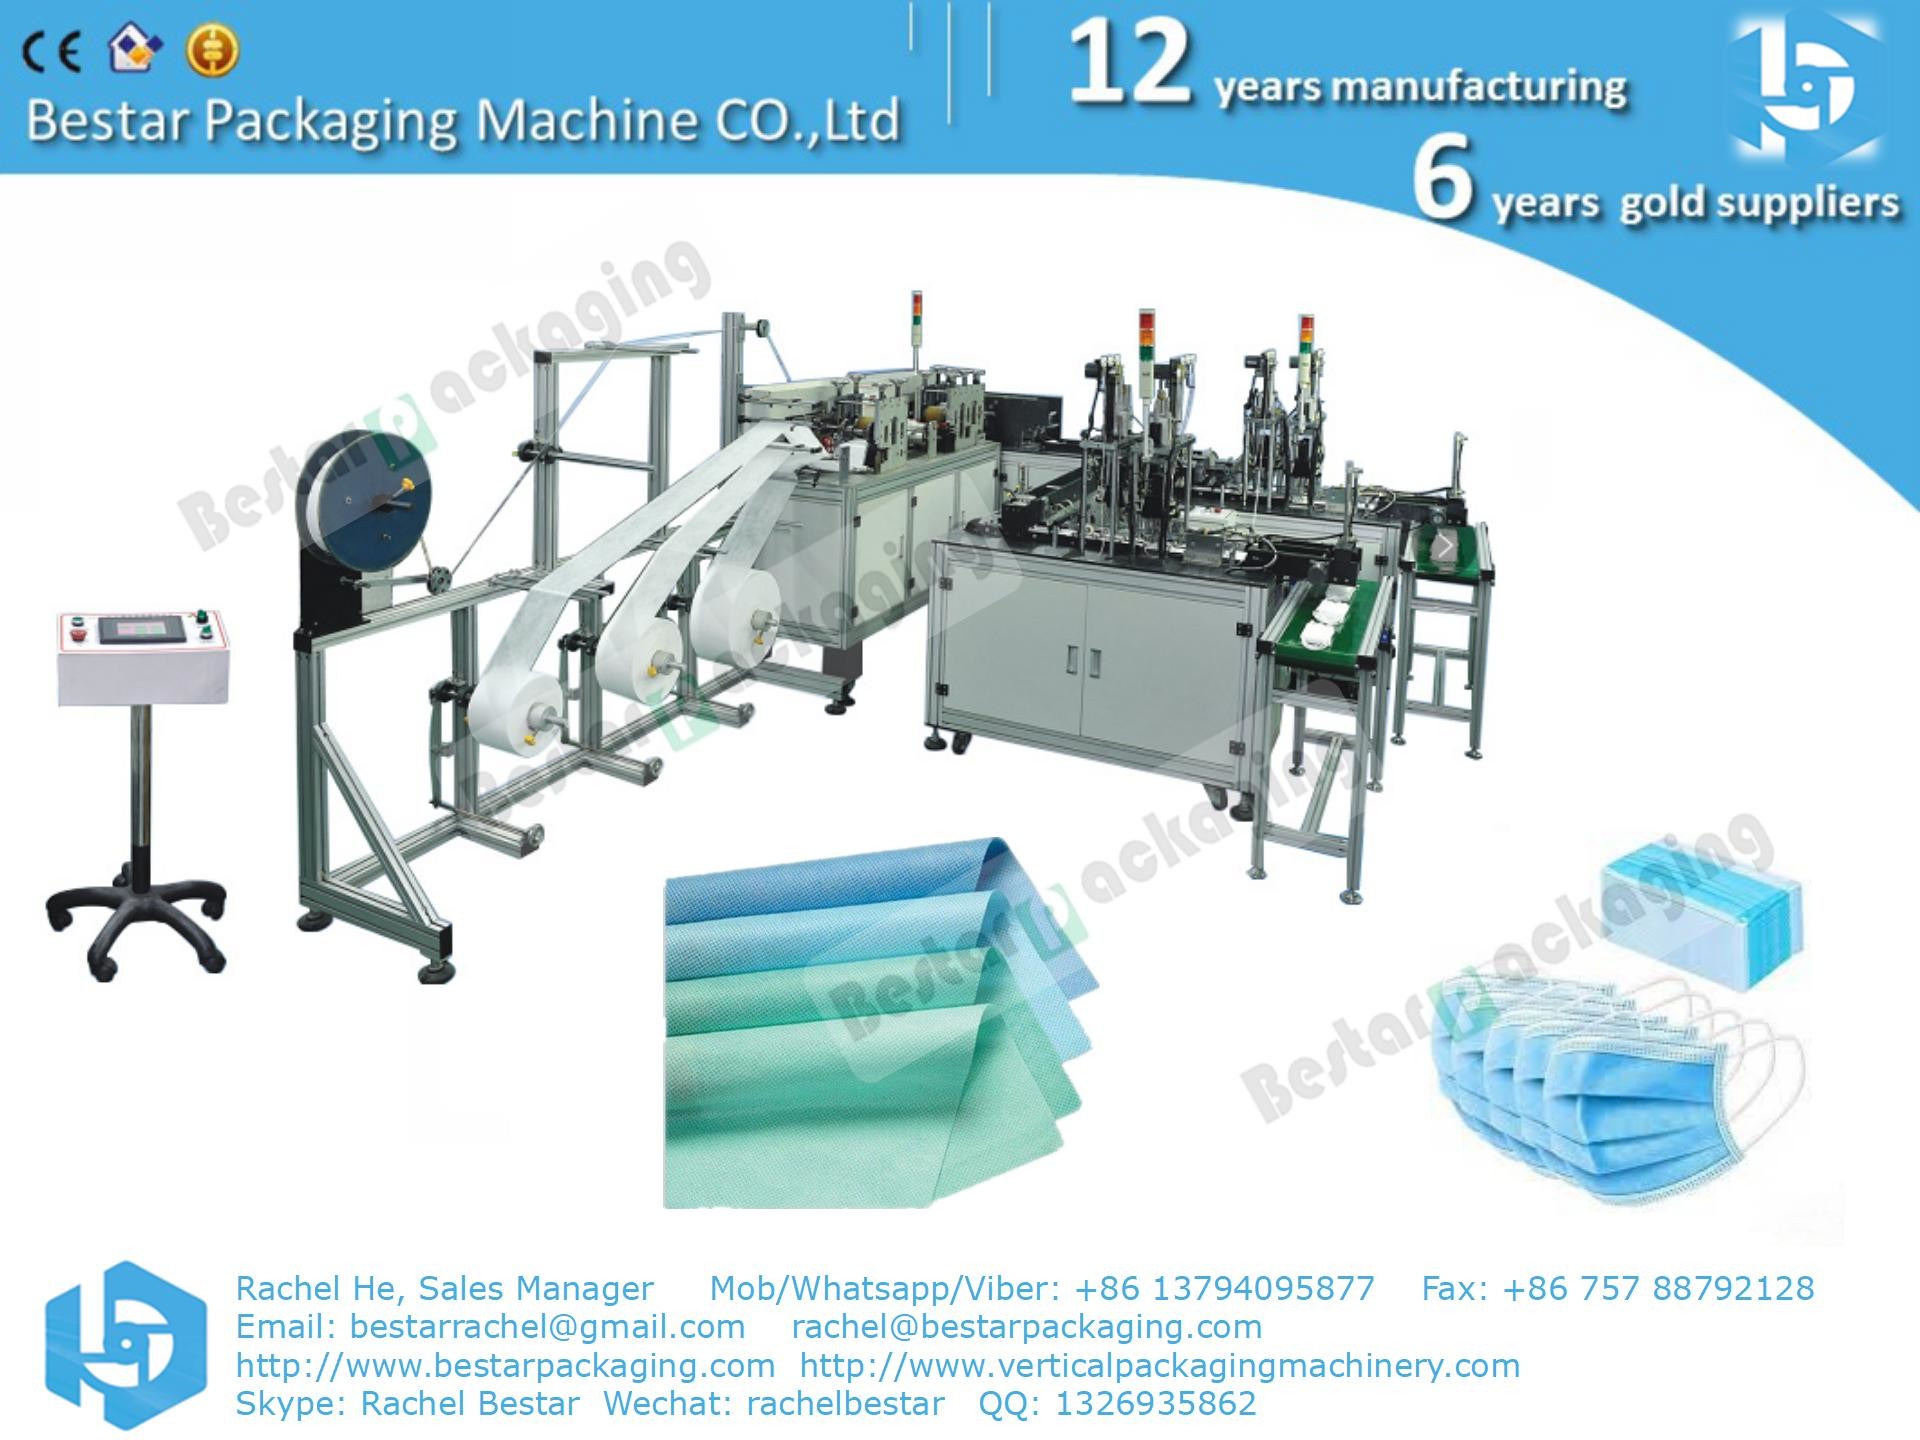 3-layers melt-blown fabric medical mask producing machine, fully automatic high capacity